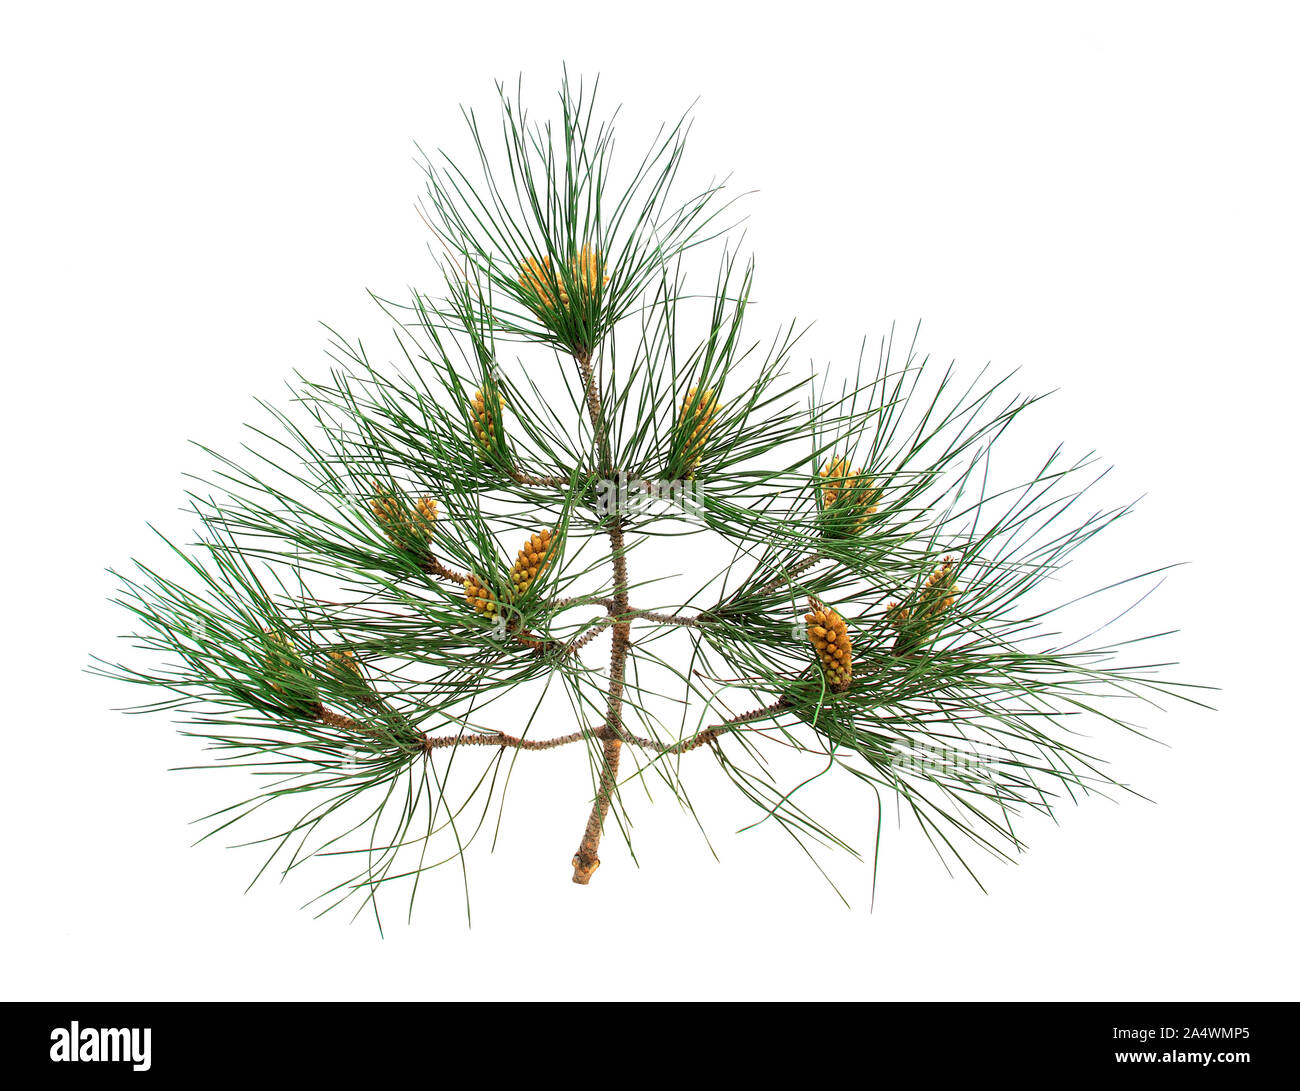 Close-up of needles and cones of Aleppo pine, isolated on white background. Stock Photo